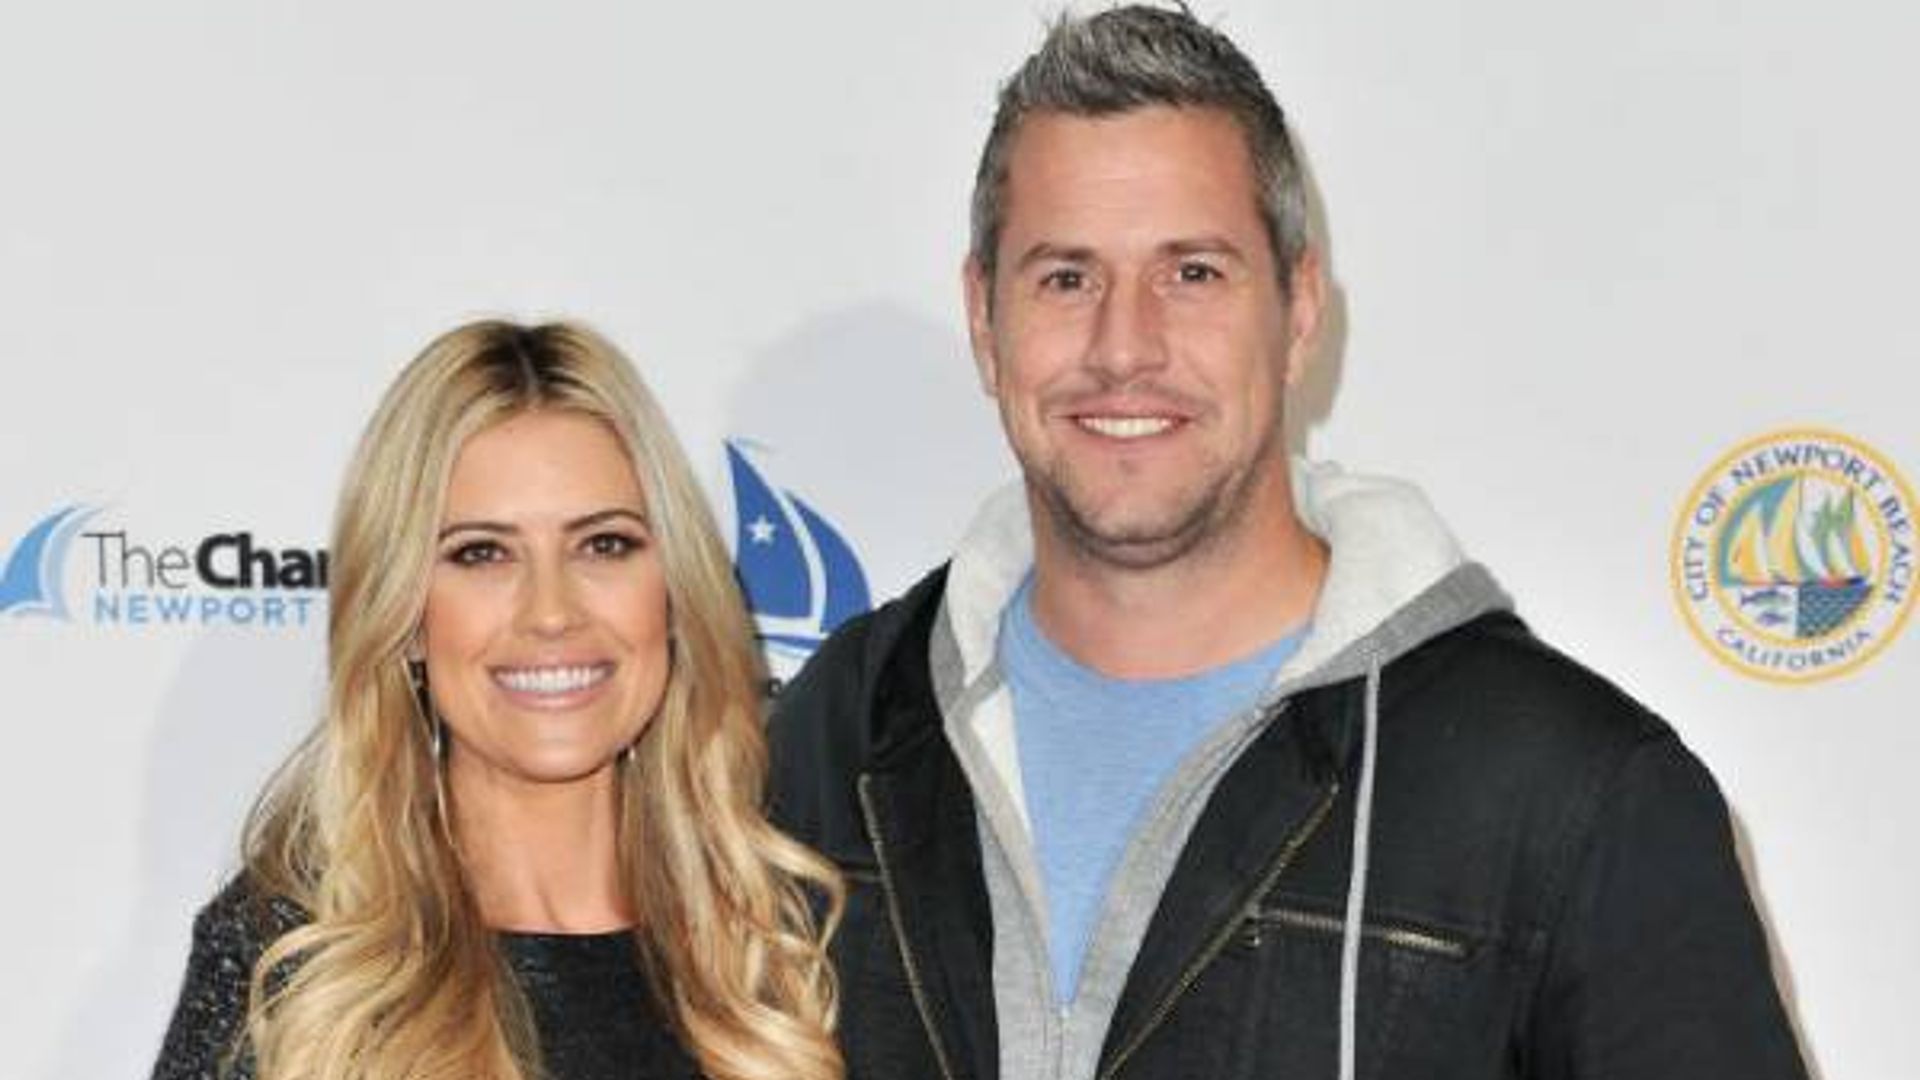 Ant Anstead and Christina Hall in Newport, California